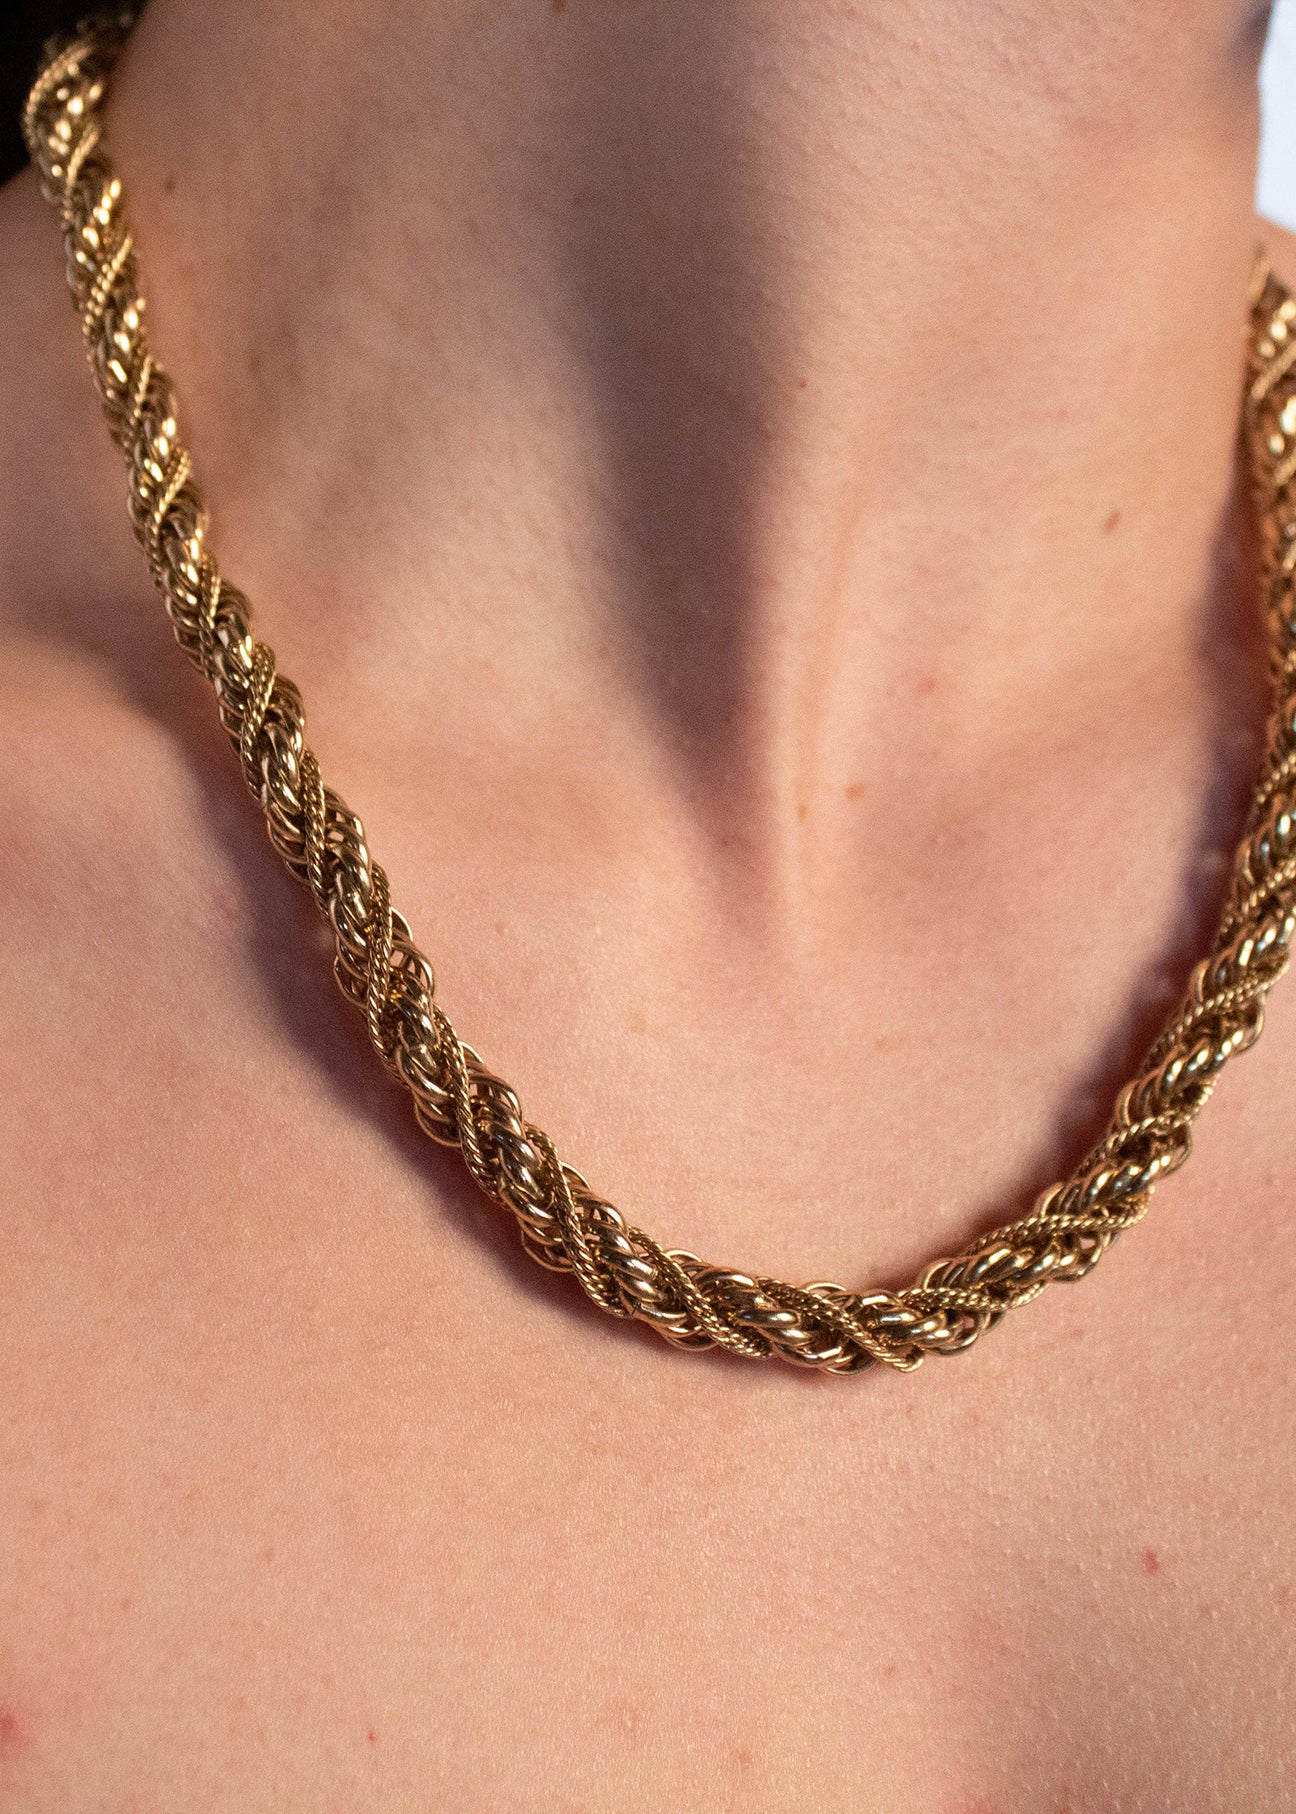 Vintage Monet Gold Rope Chain Necklace